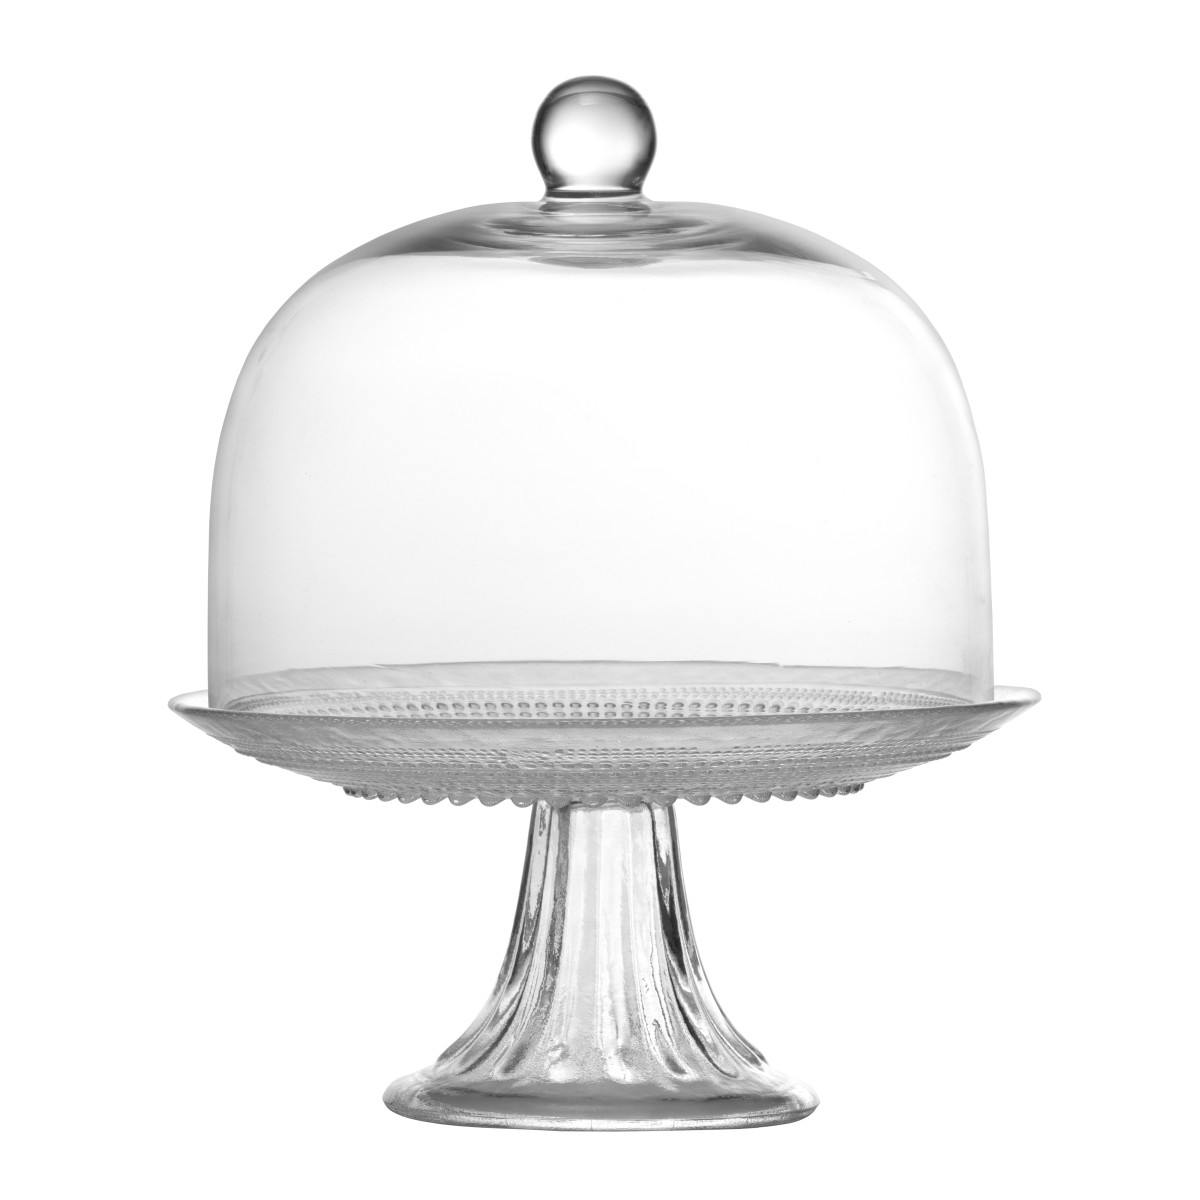 Jupiter Clear 8.5" Cake Stand and Dome Set